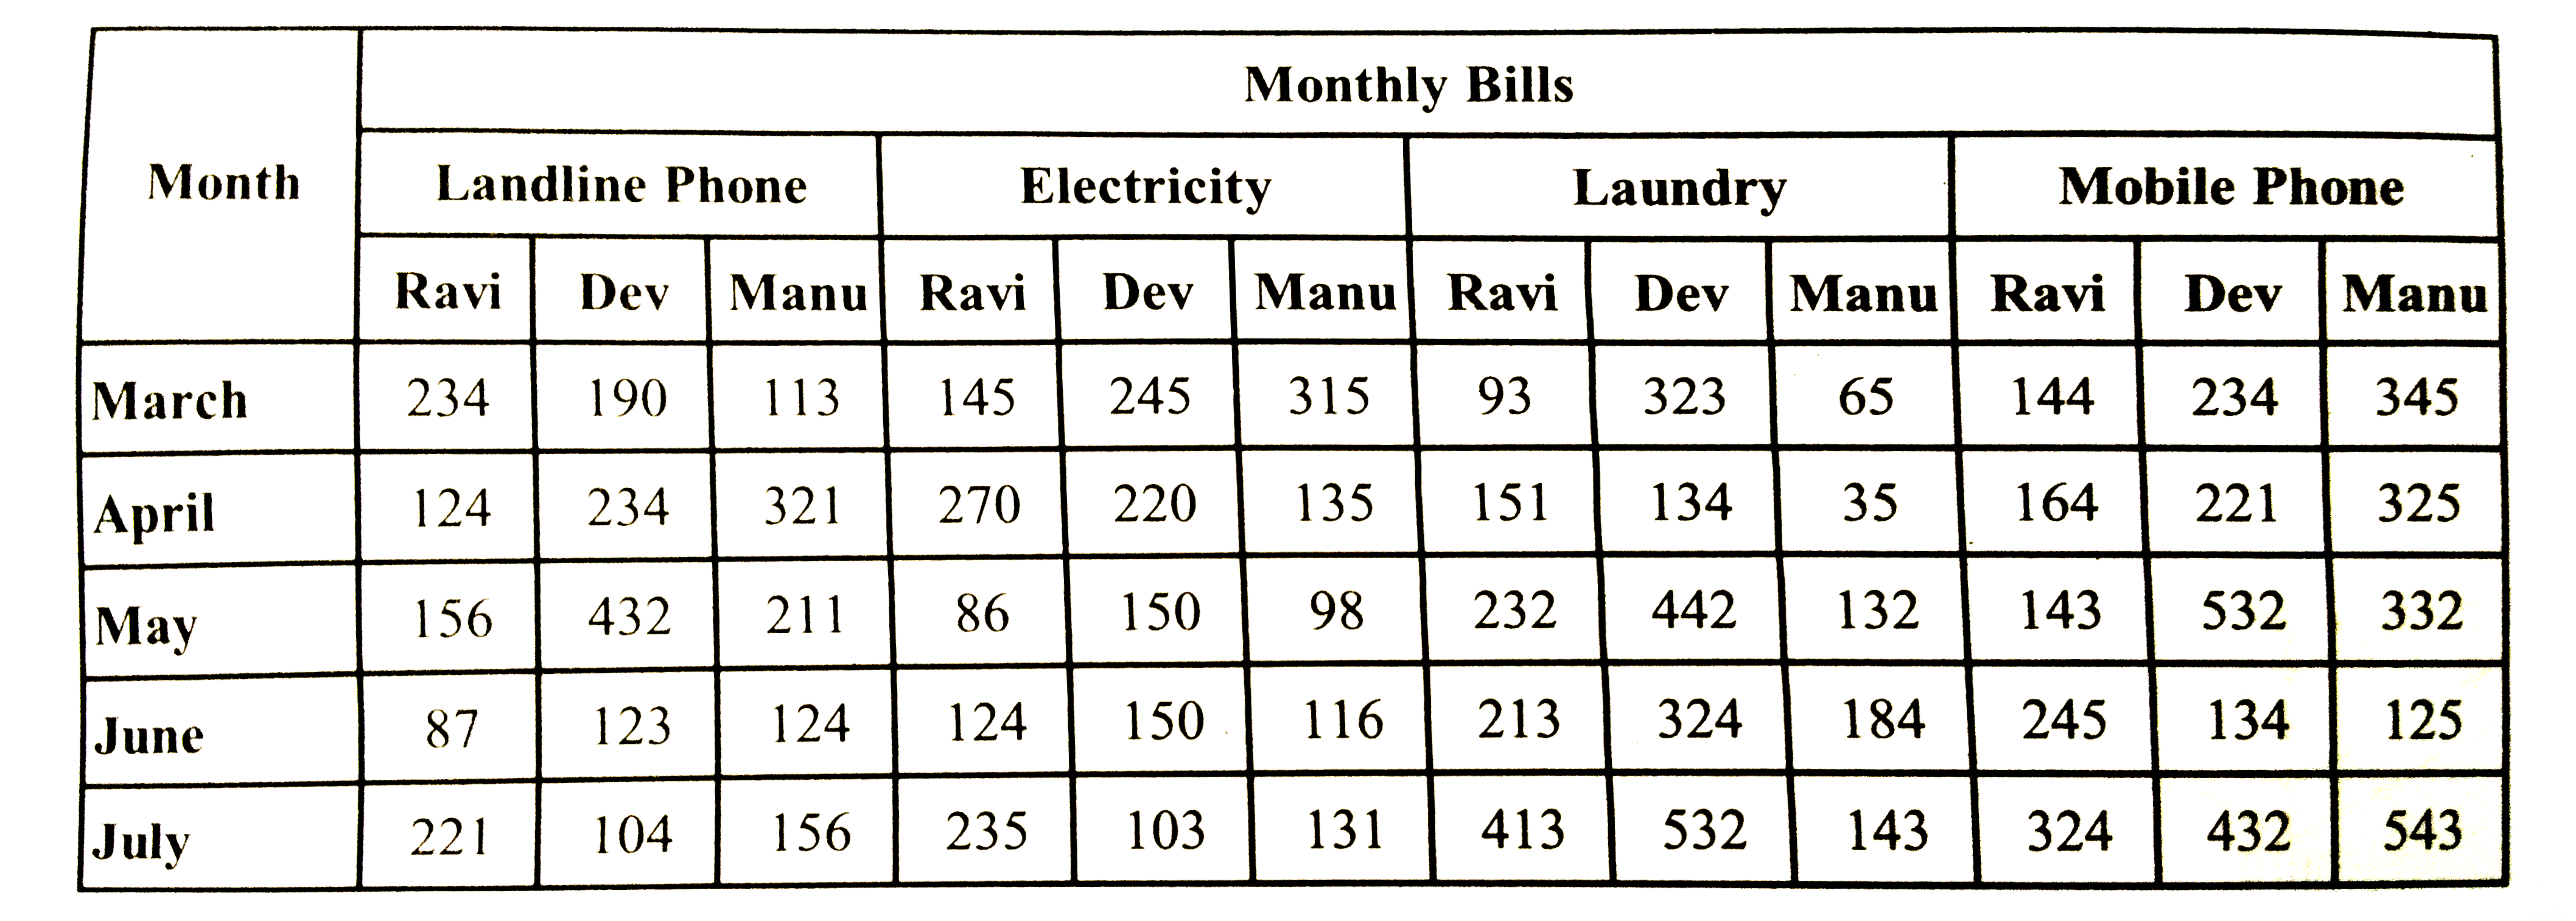 What is the average electricity bill paid by Manu over all the five months together ?